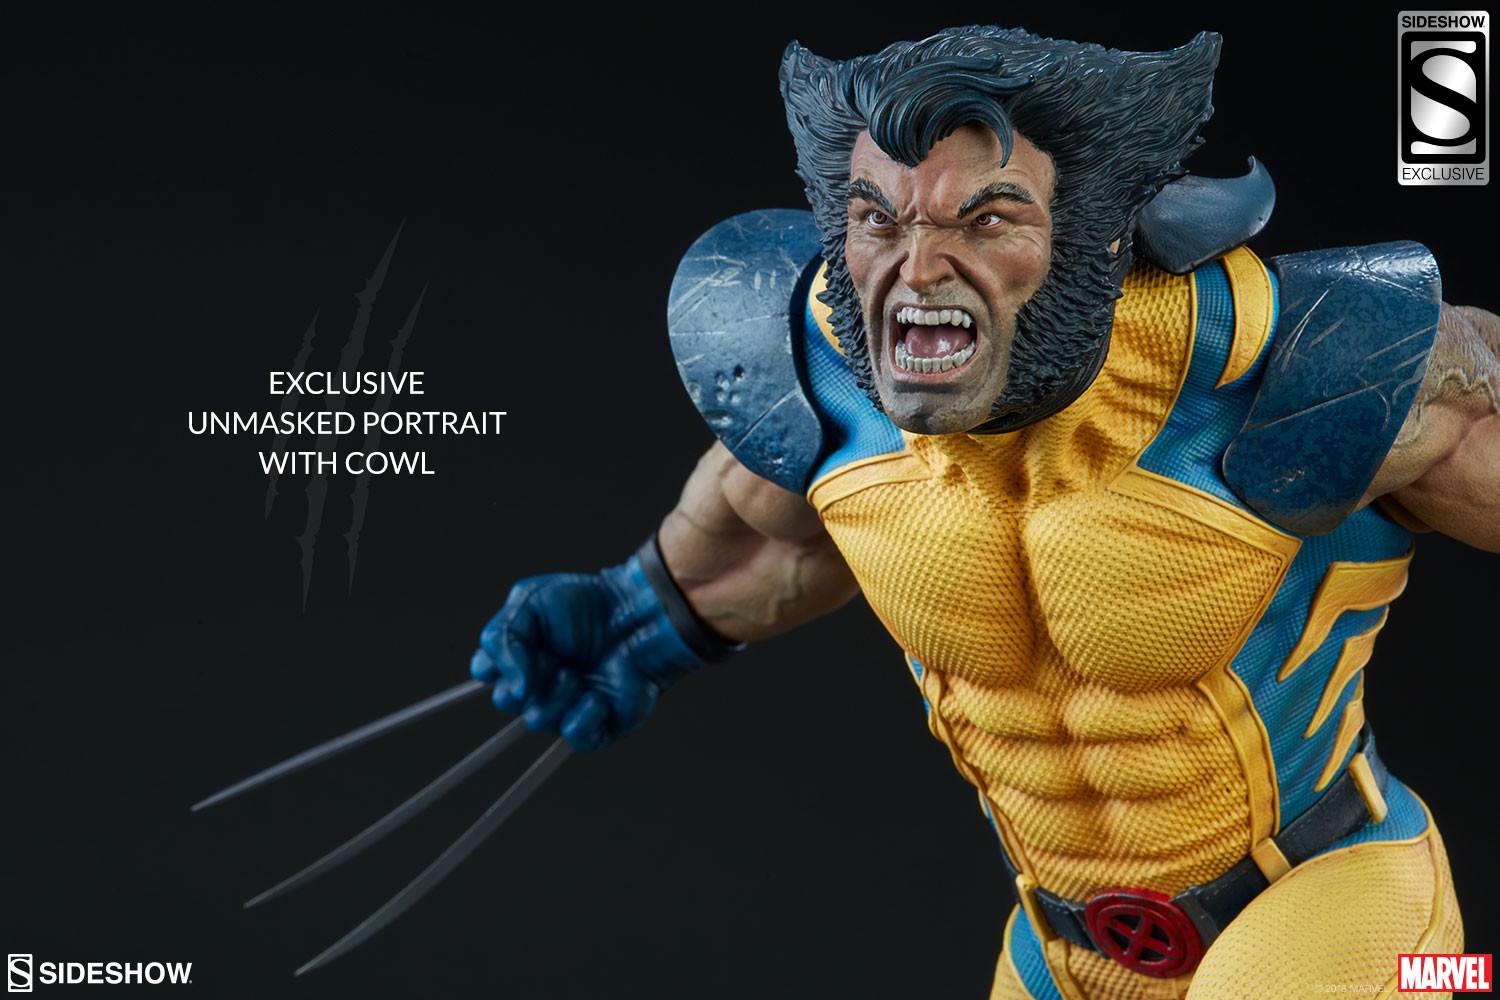 Wolverine Exclusive Edition View 1